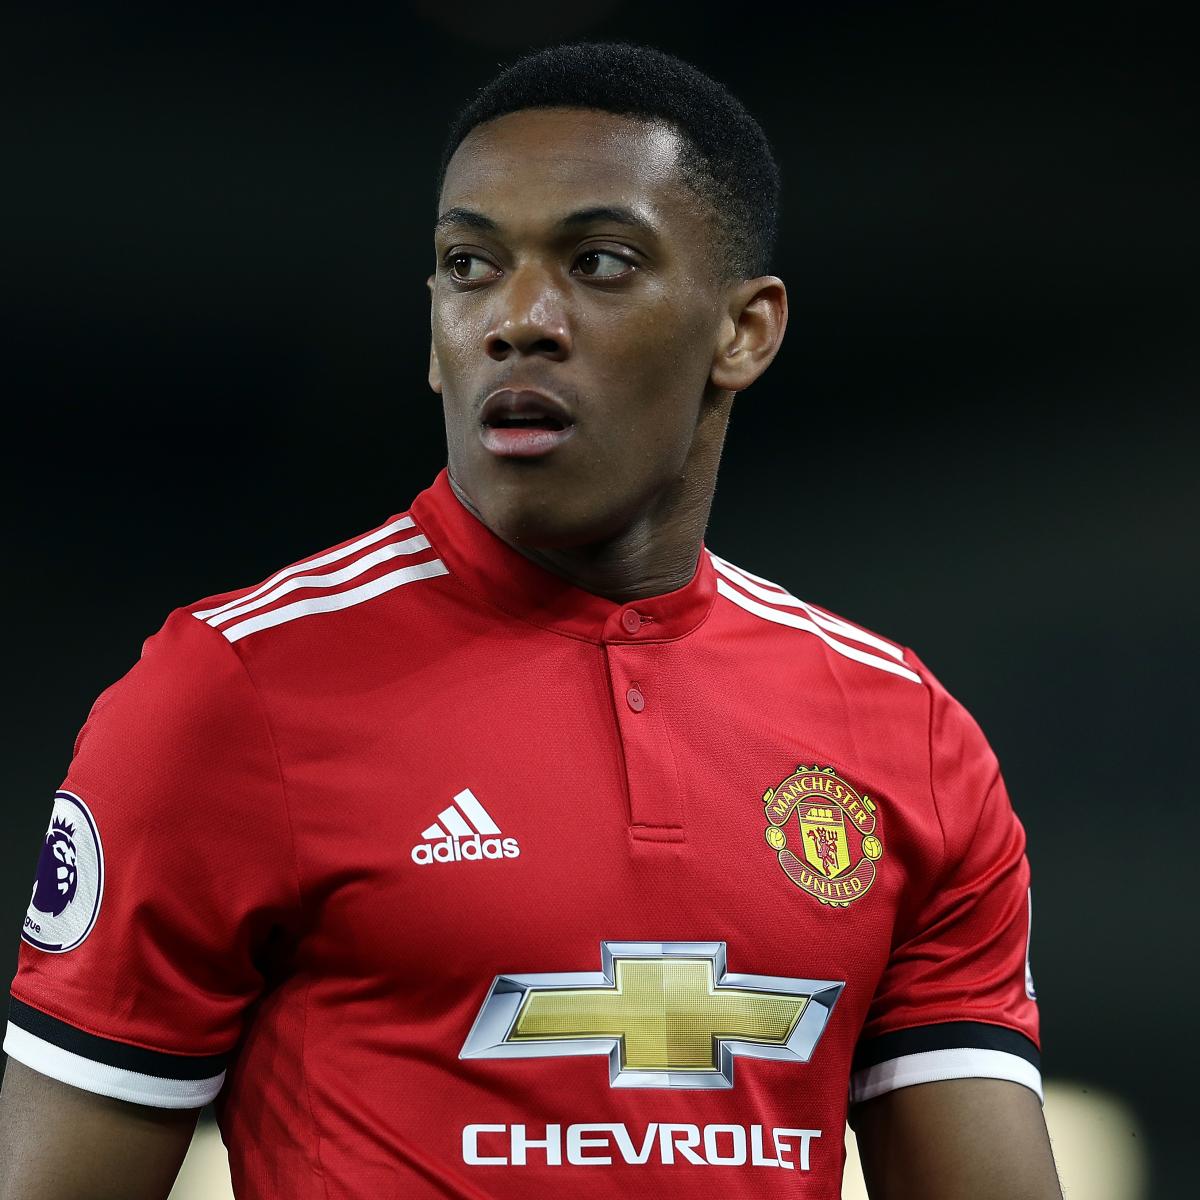 Manchester United Transfer News: Anthony Martial's Agent Says He Wants